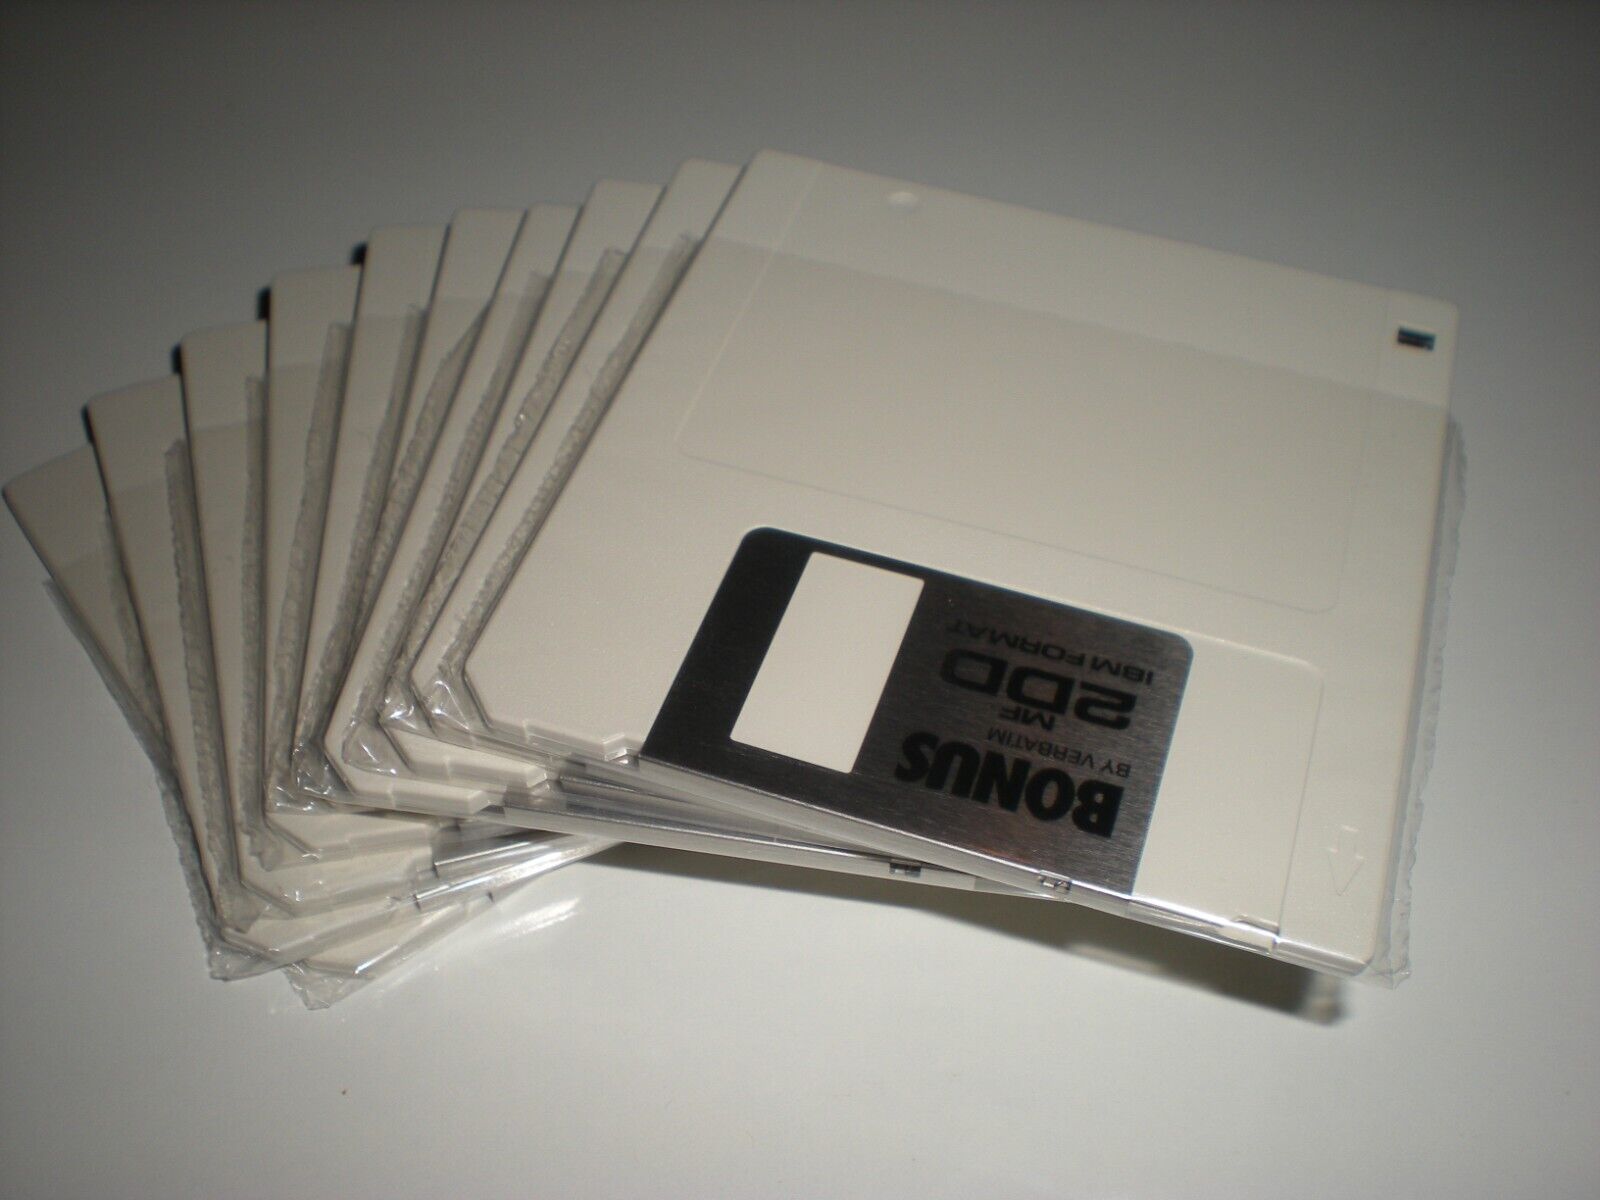 10-pk 3.5 in. DSDD DS 720k formatted floppy disks. Opened for inspection.